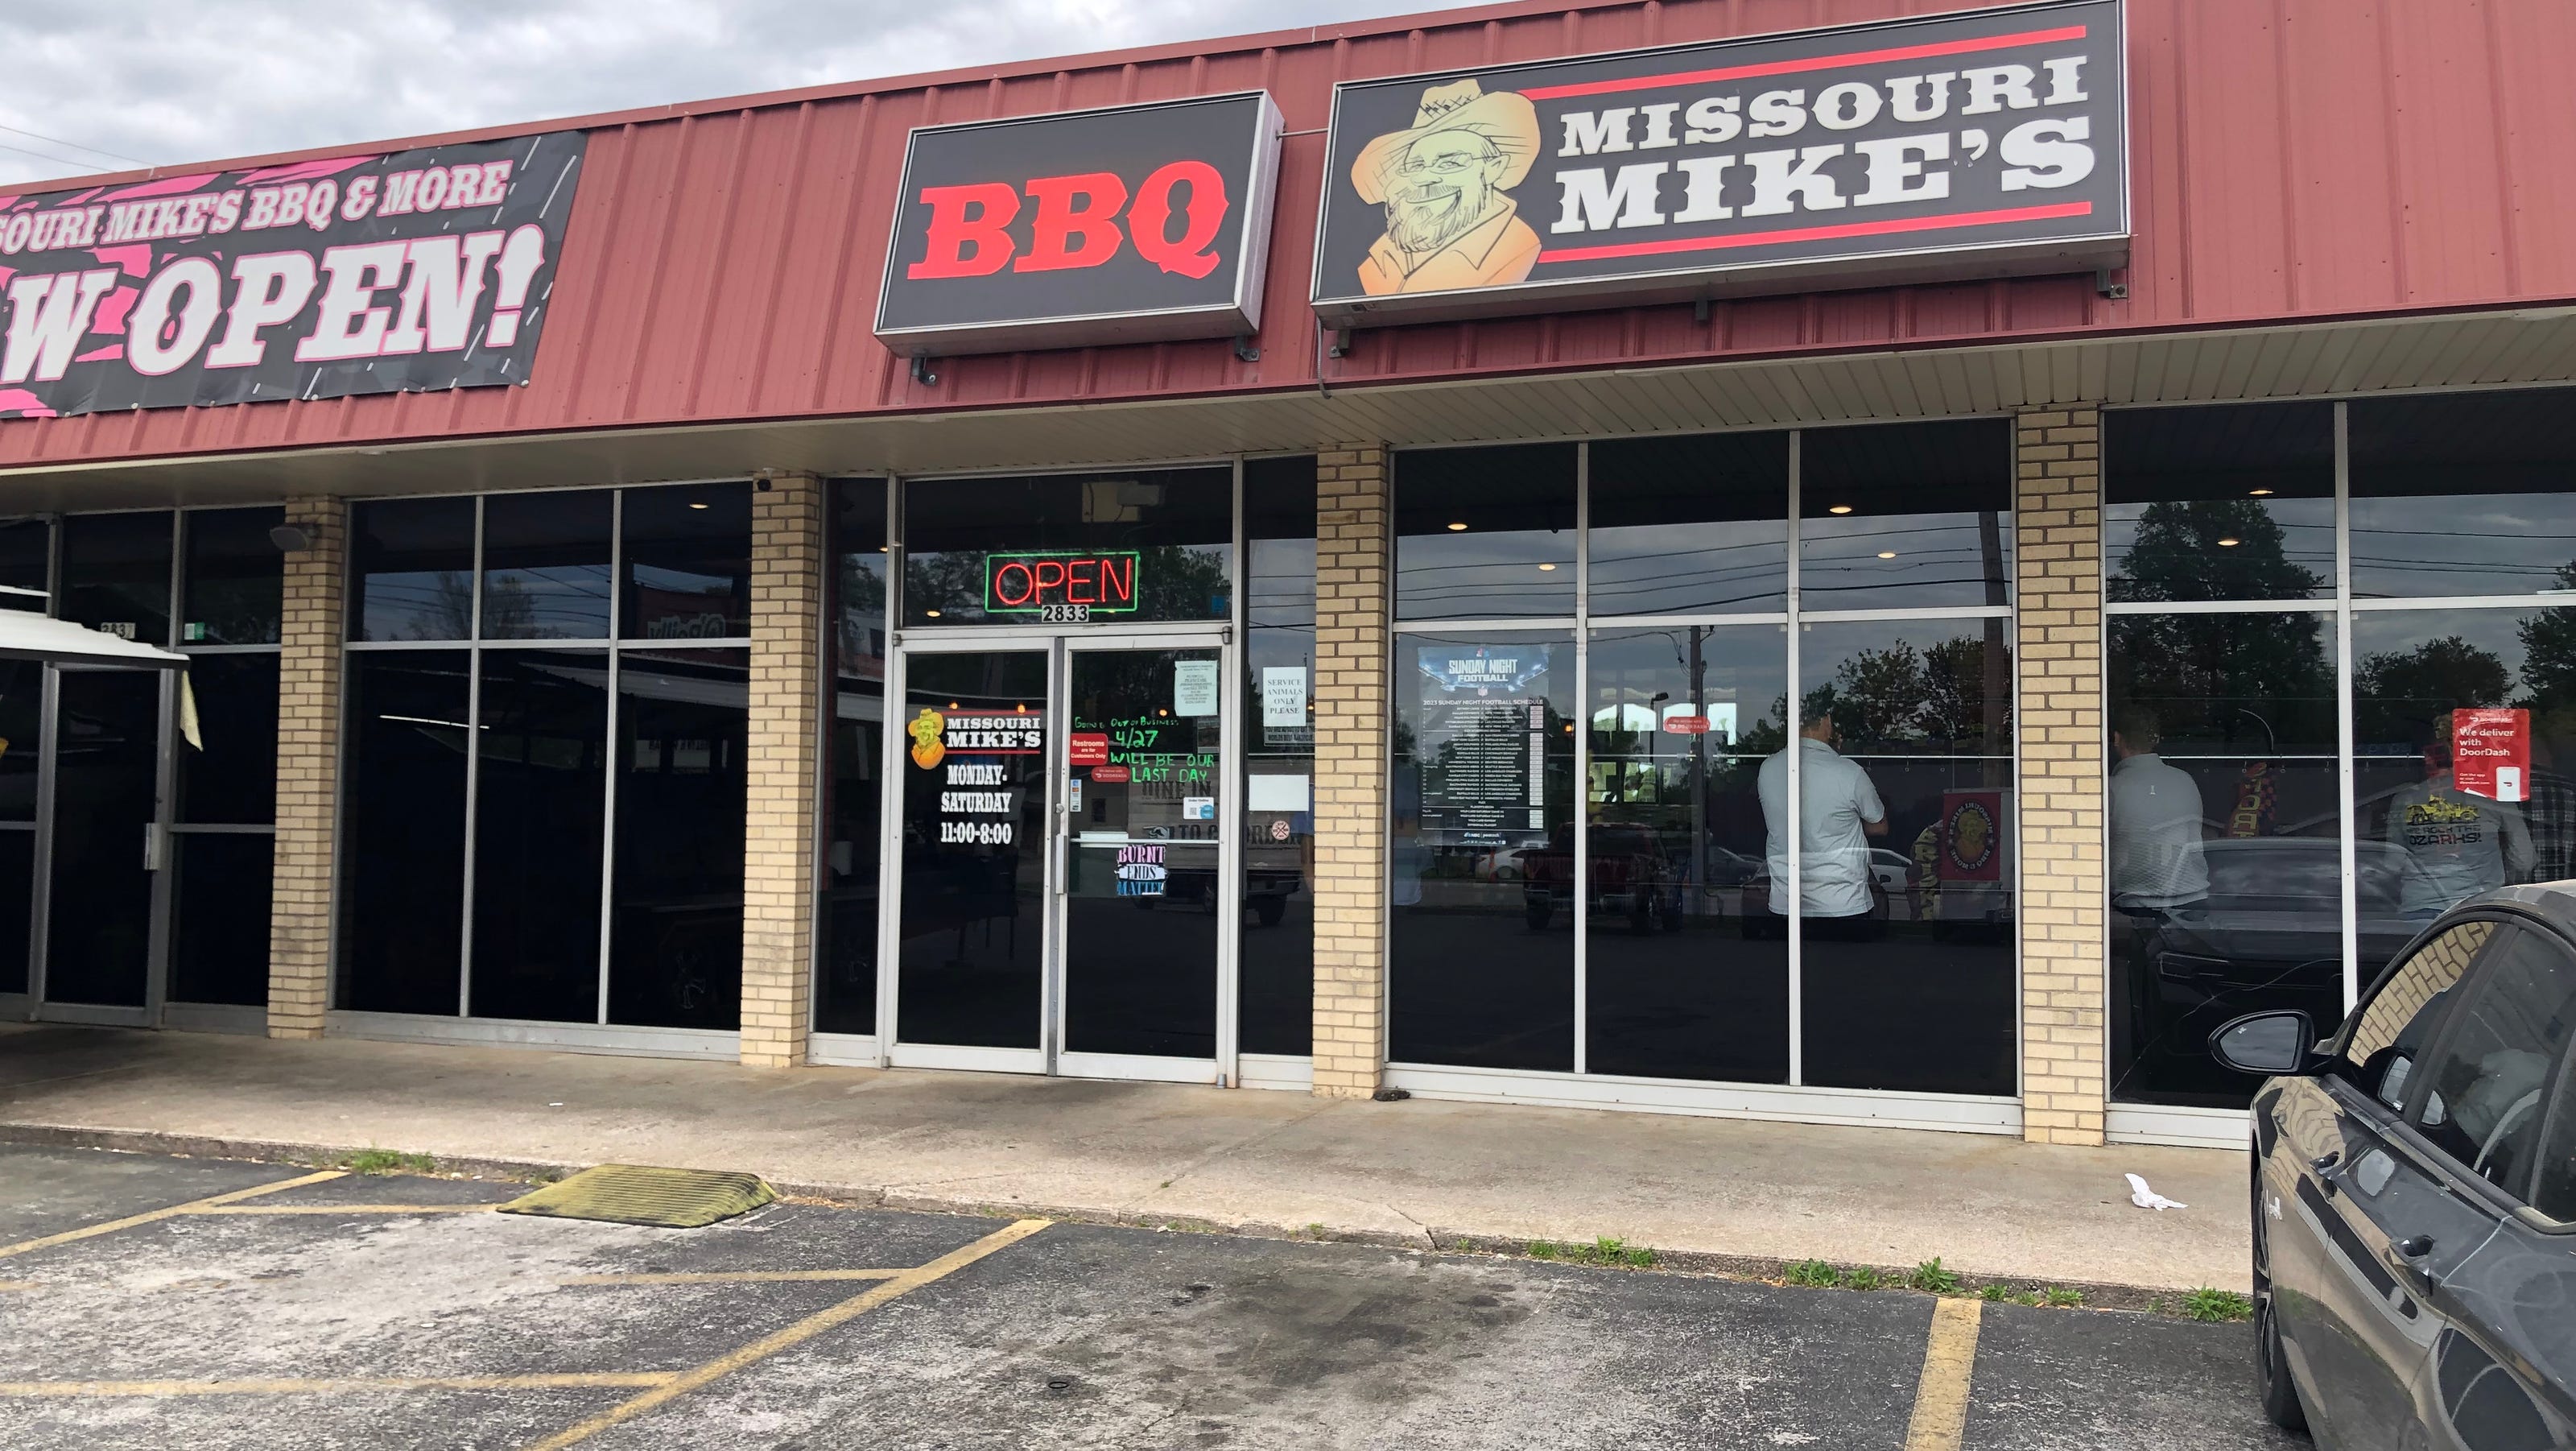  Springfield's Missouri Mike's BBQ & More announces final day will be April 27 